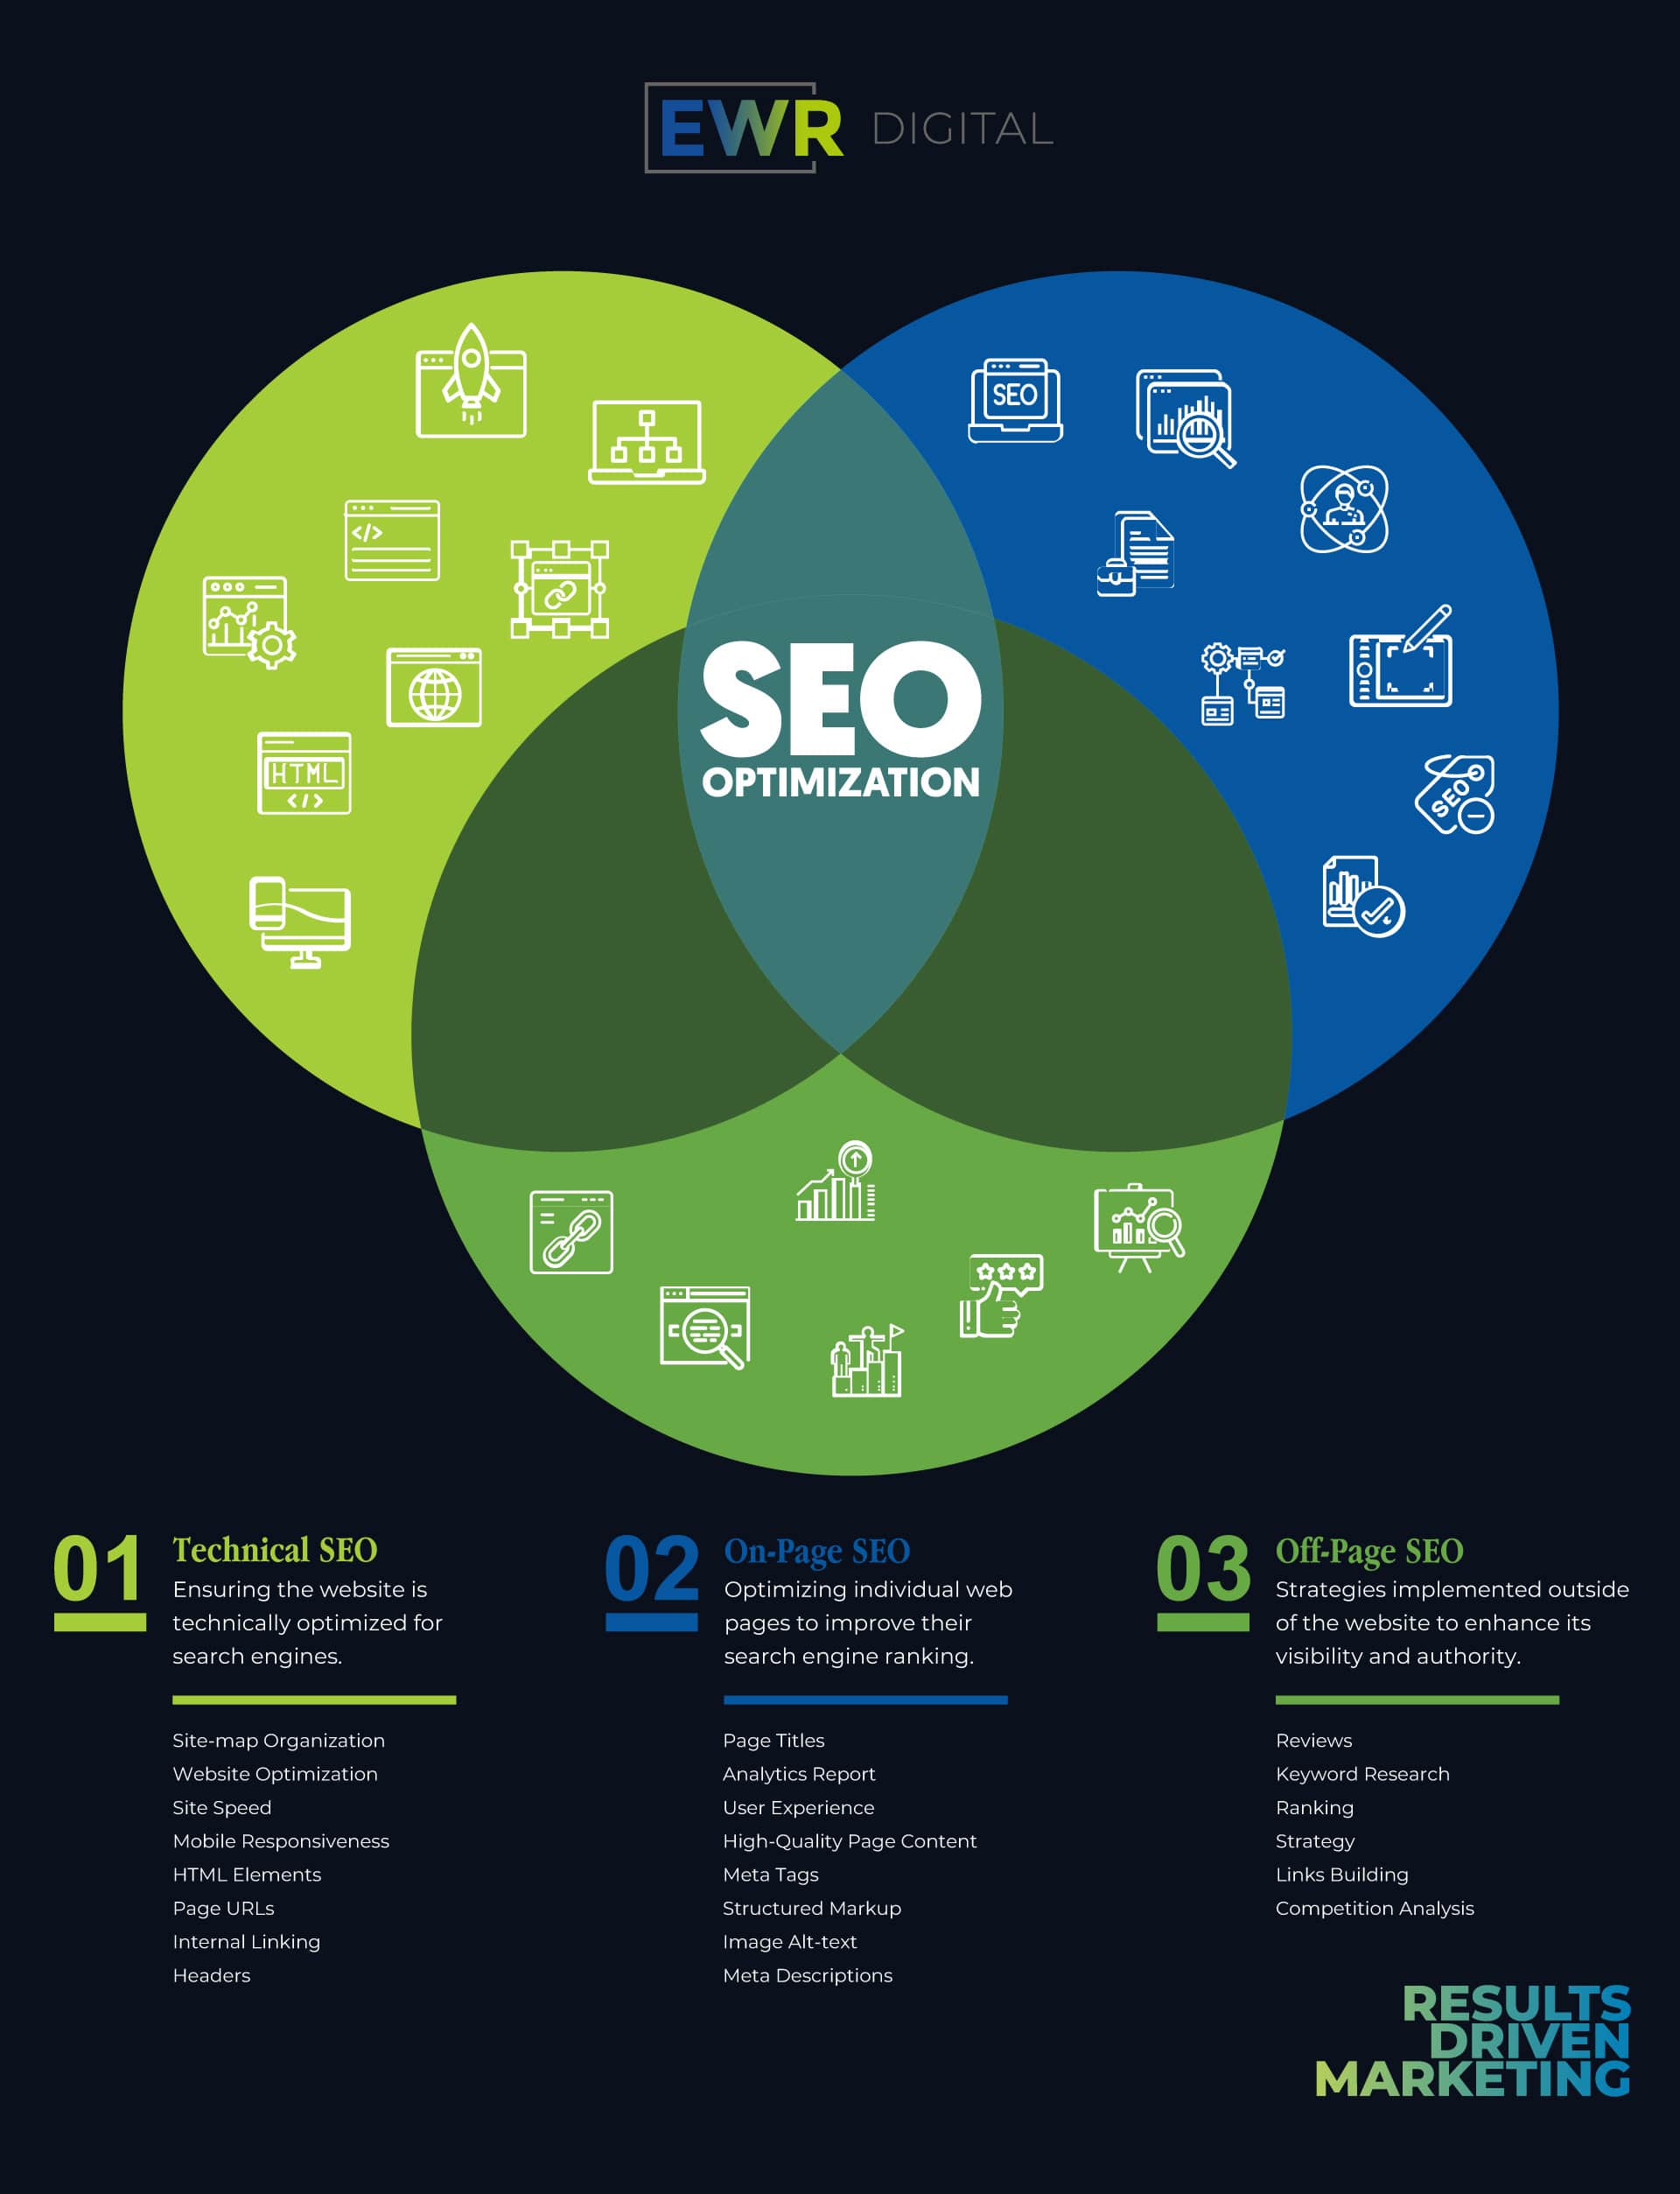 A Venn diagram illustrating the intersection of Technical SEO, Onpage SEO, and Offpage SEO aspects for comprehensive search engine optimization.